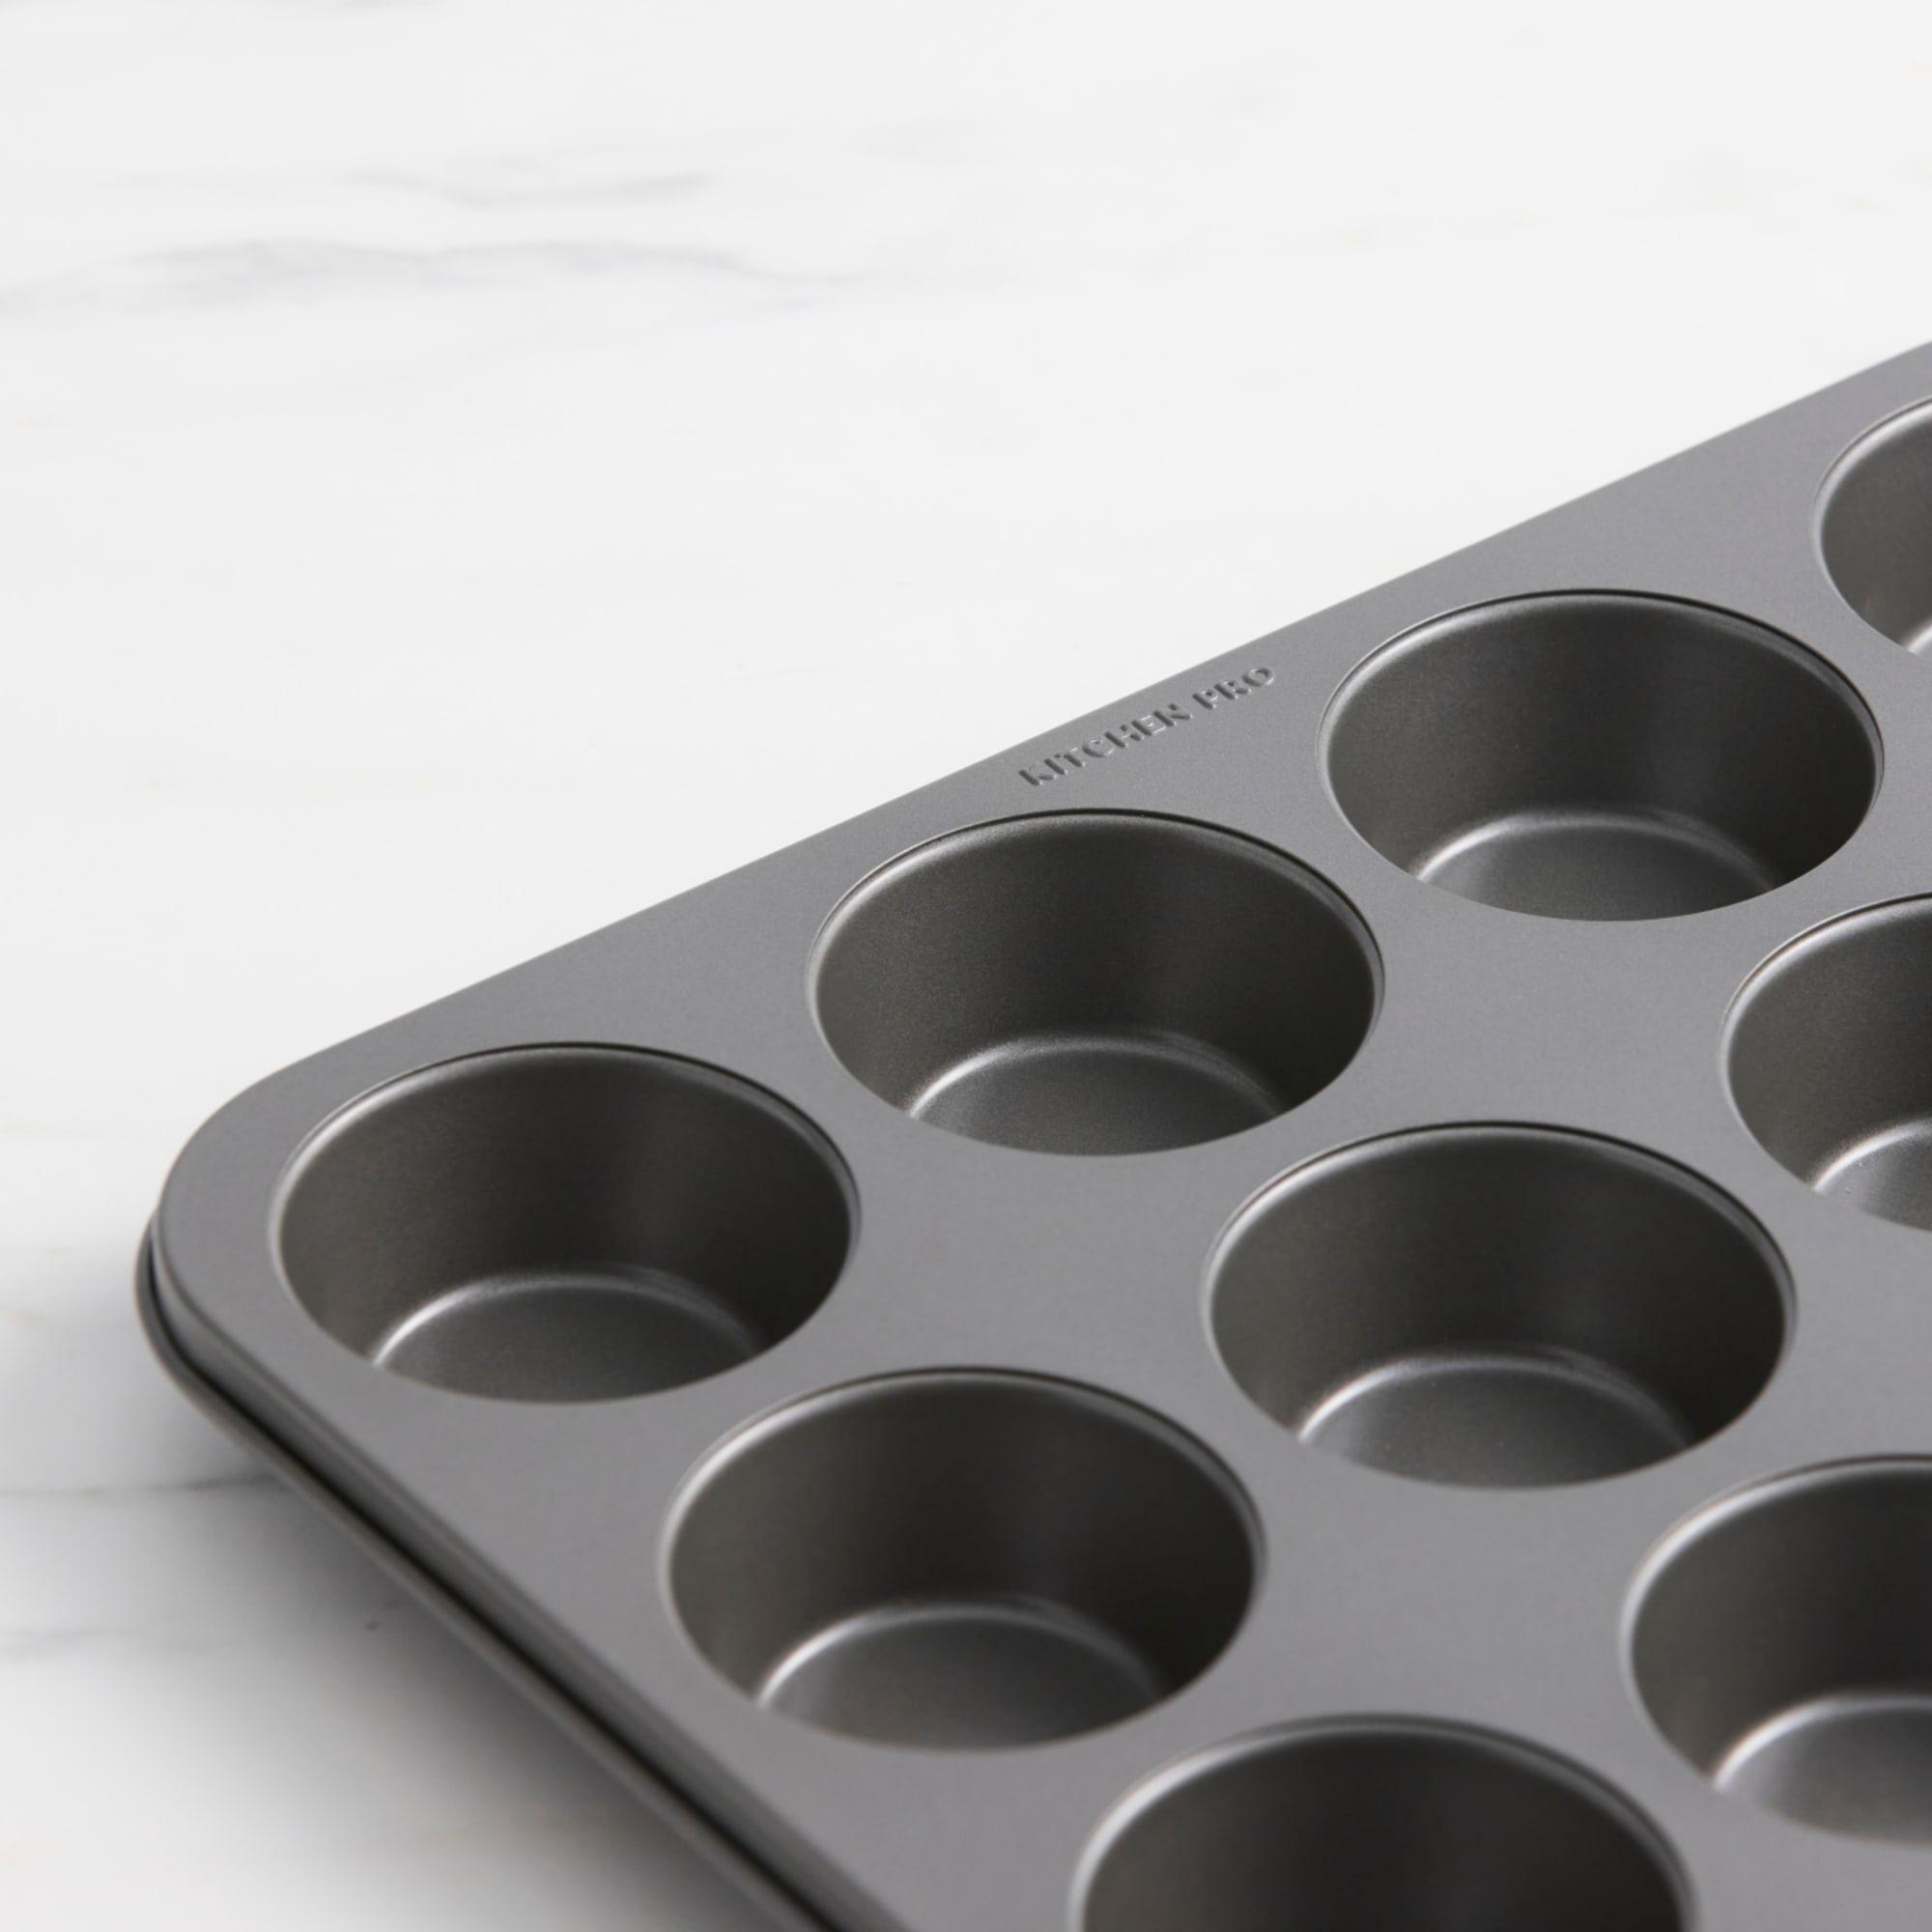 Kitchen Pro Bakewell Muffin Pan 12 Cup Image 4